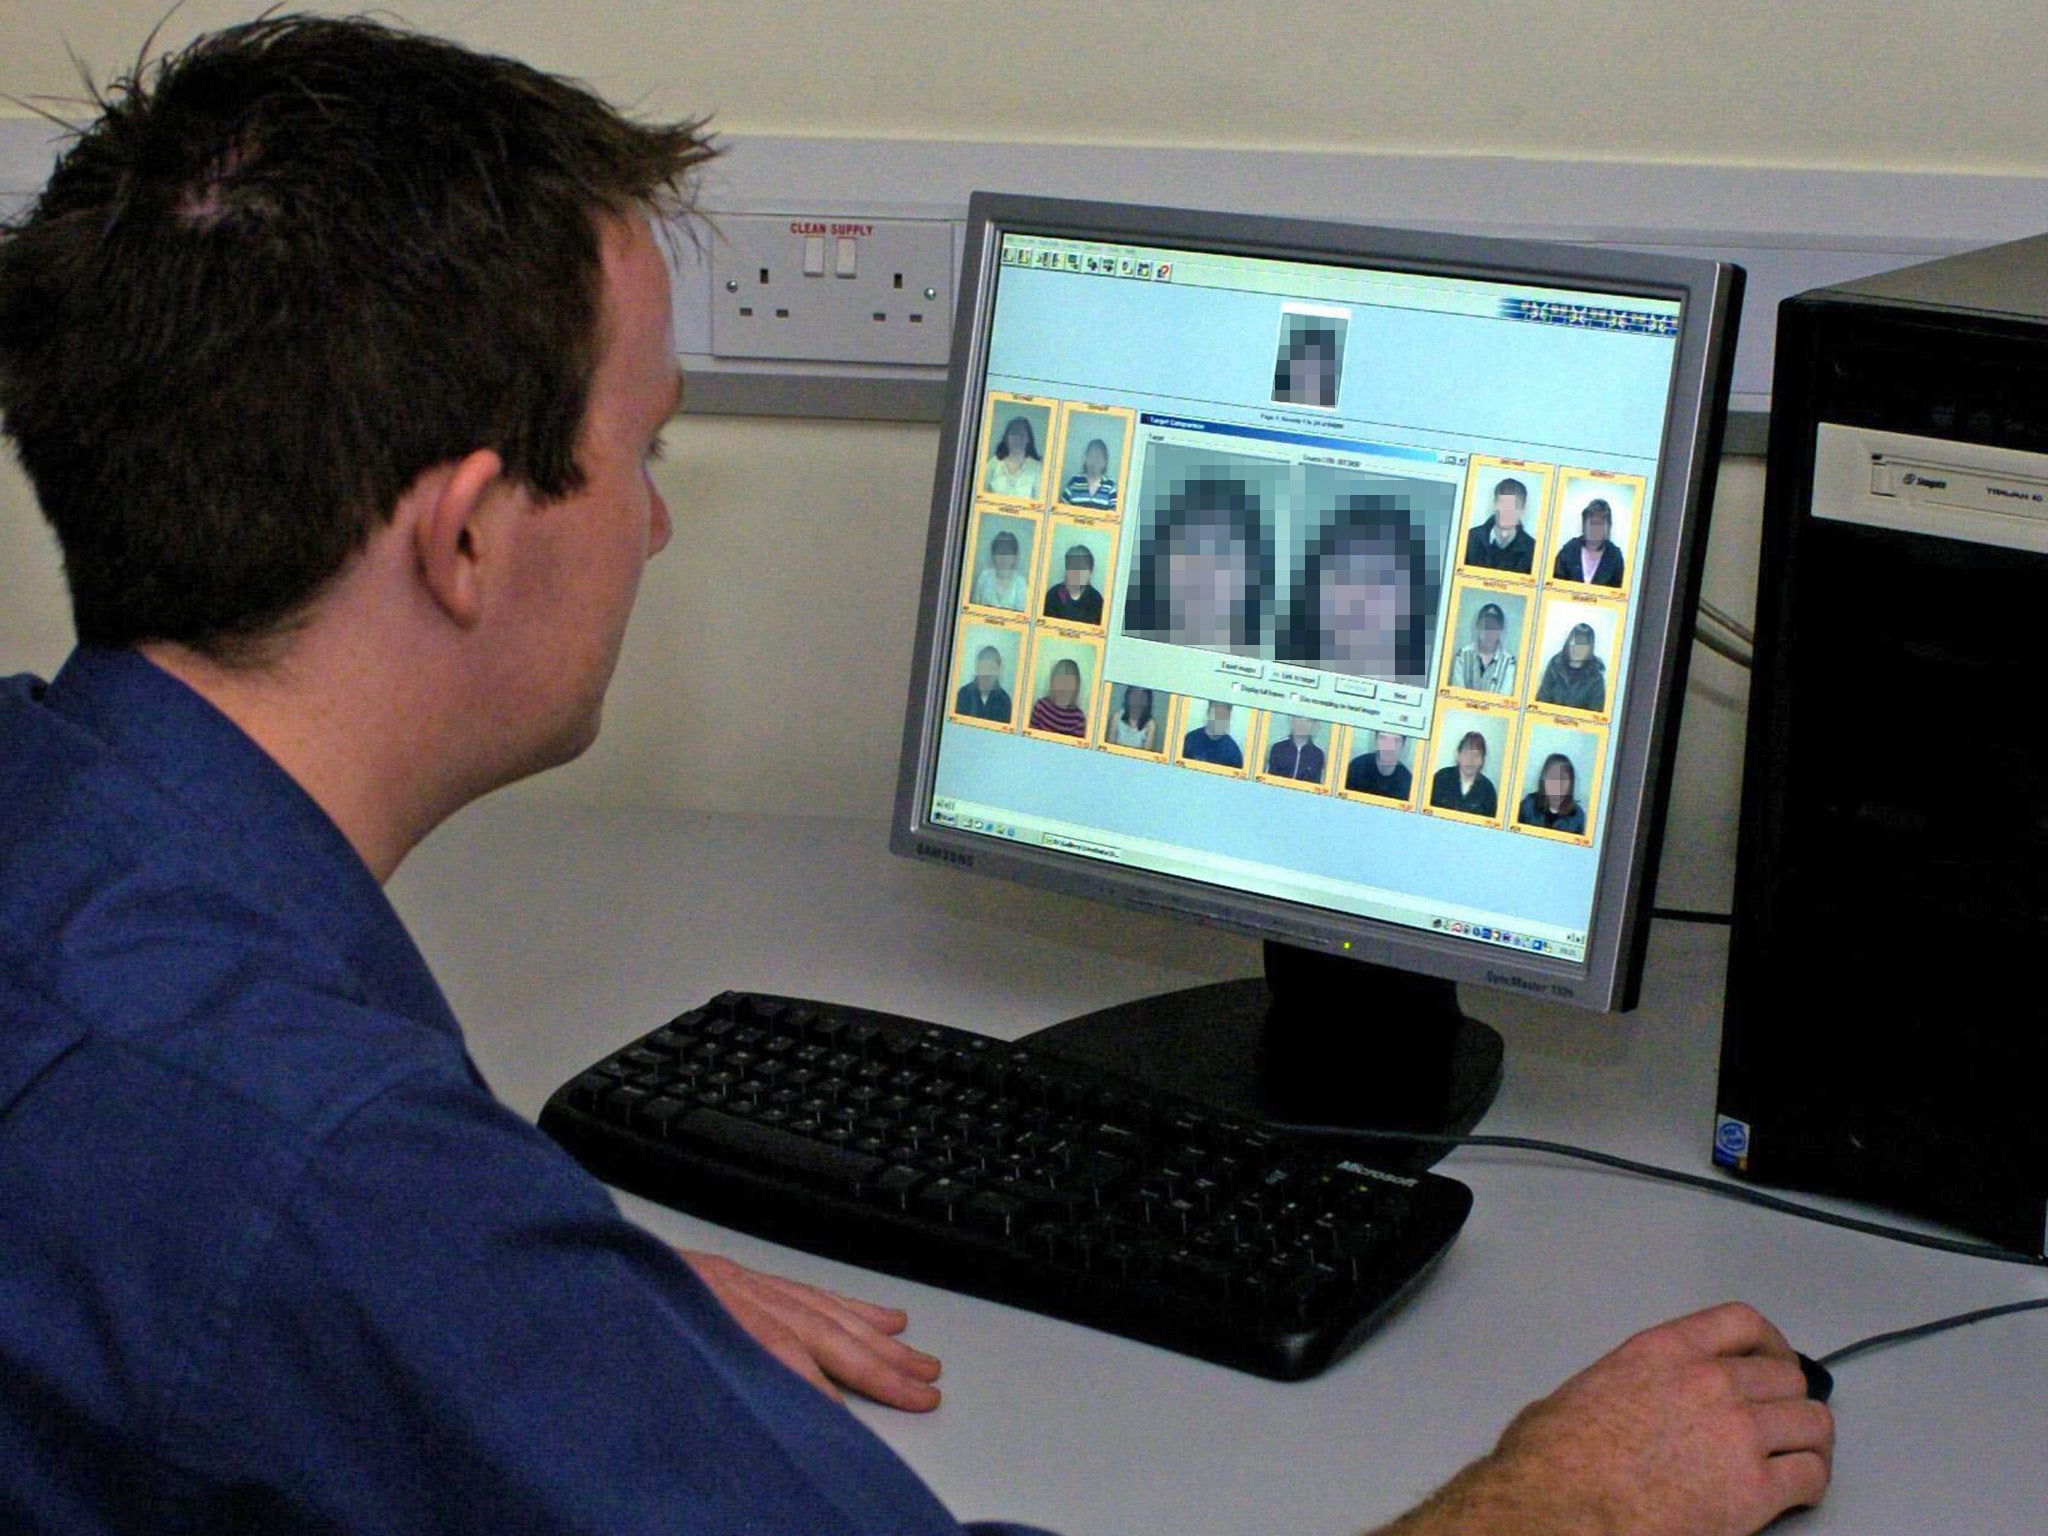 The technology automatically compares people’s faces to police databases in real time, flagging up potential matches